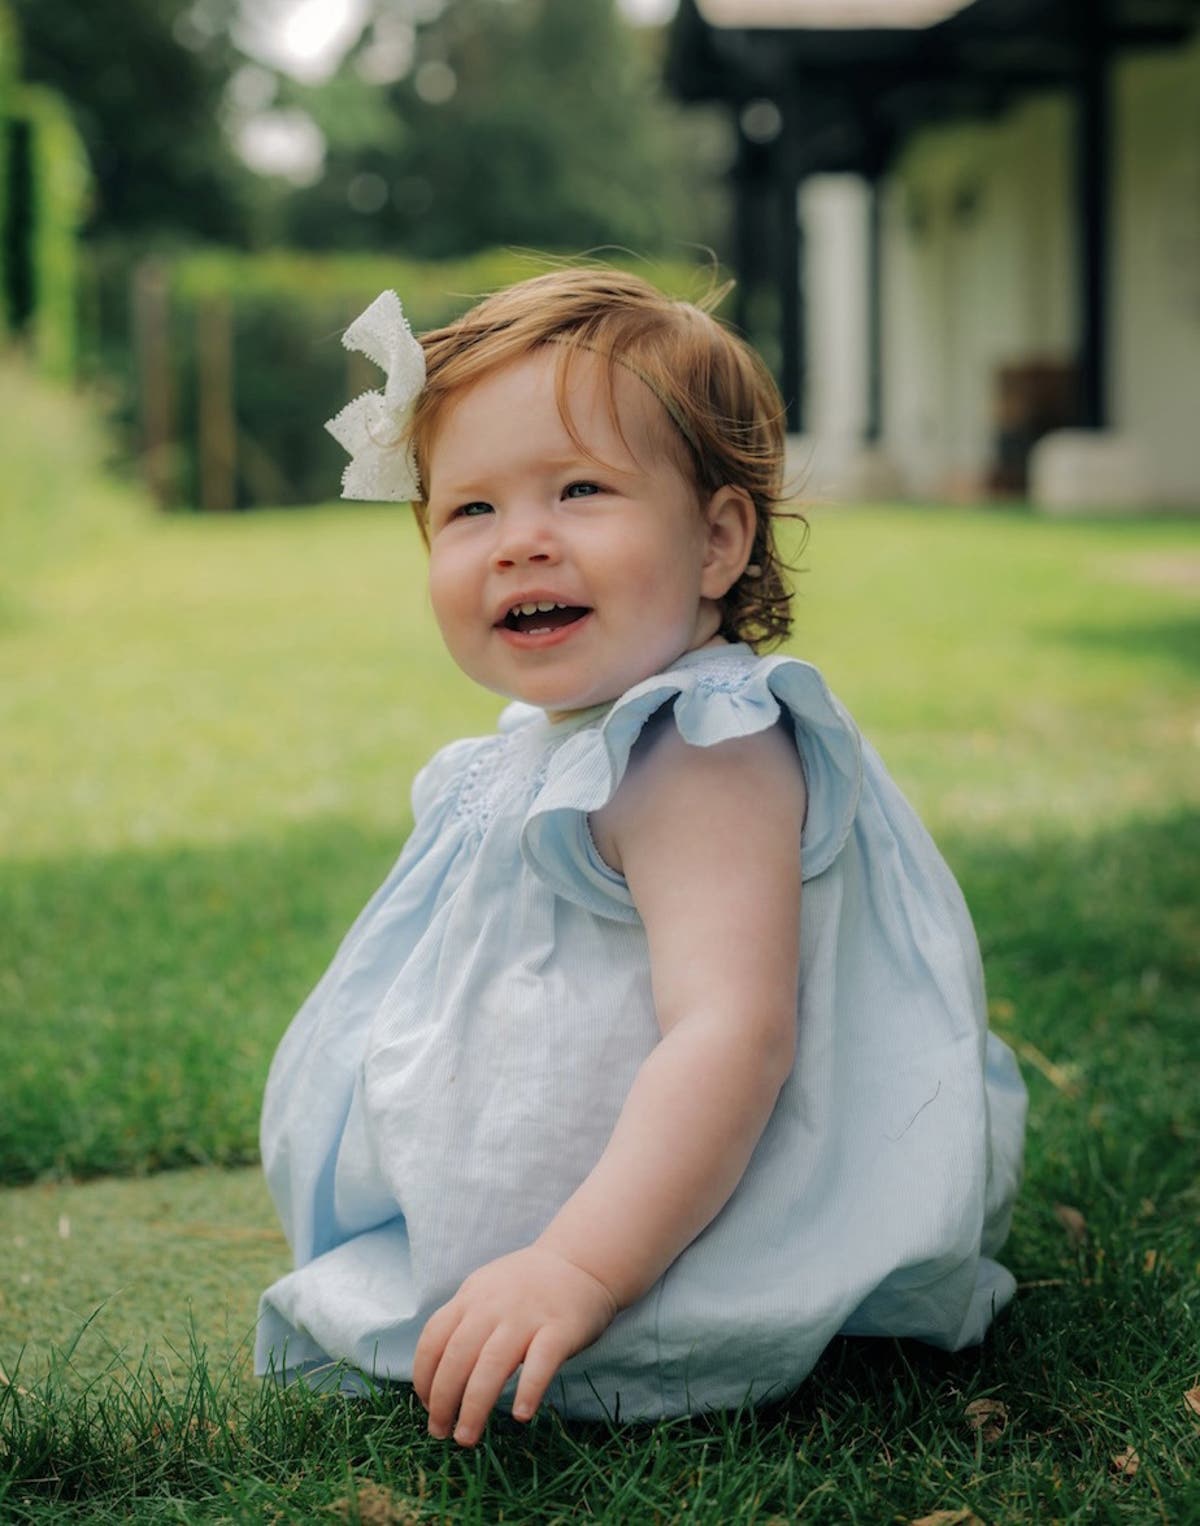 Harry and Meghan share photo of Lilibet on first birthday at Frogmore Cottage